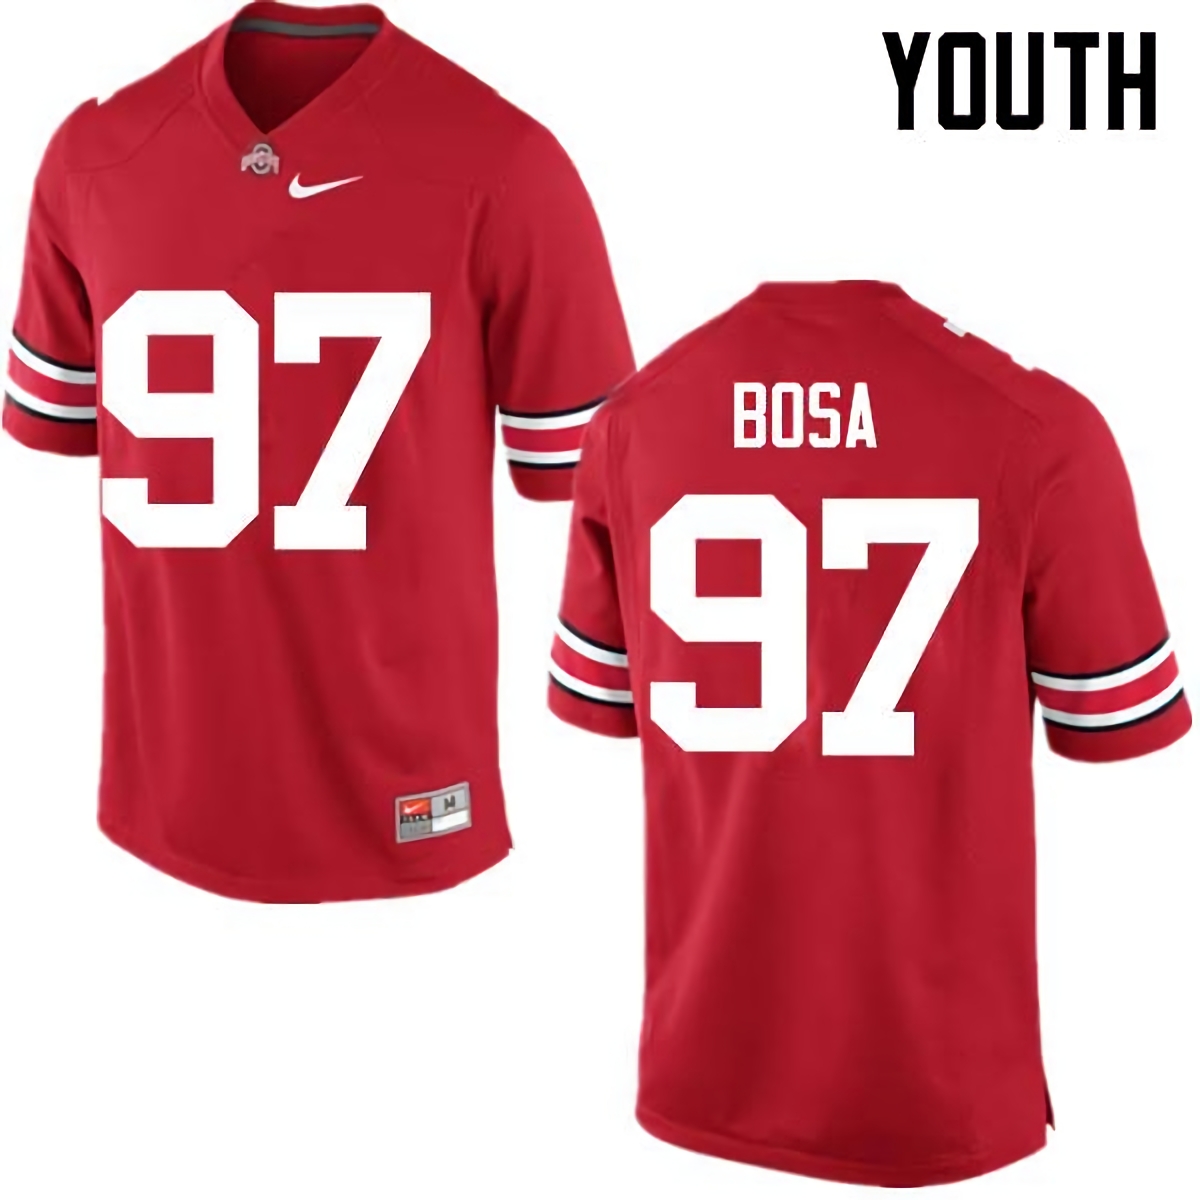 Joey Bosa Ohio State Buckeyes Youth NCAA #97 Nike Red College Stitched Football Jersey DCD3056XJ